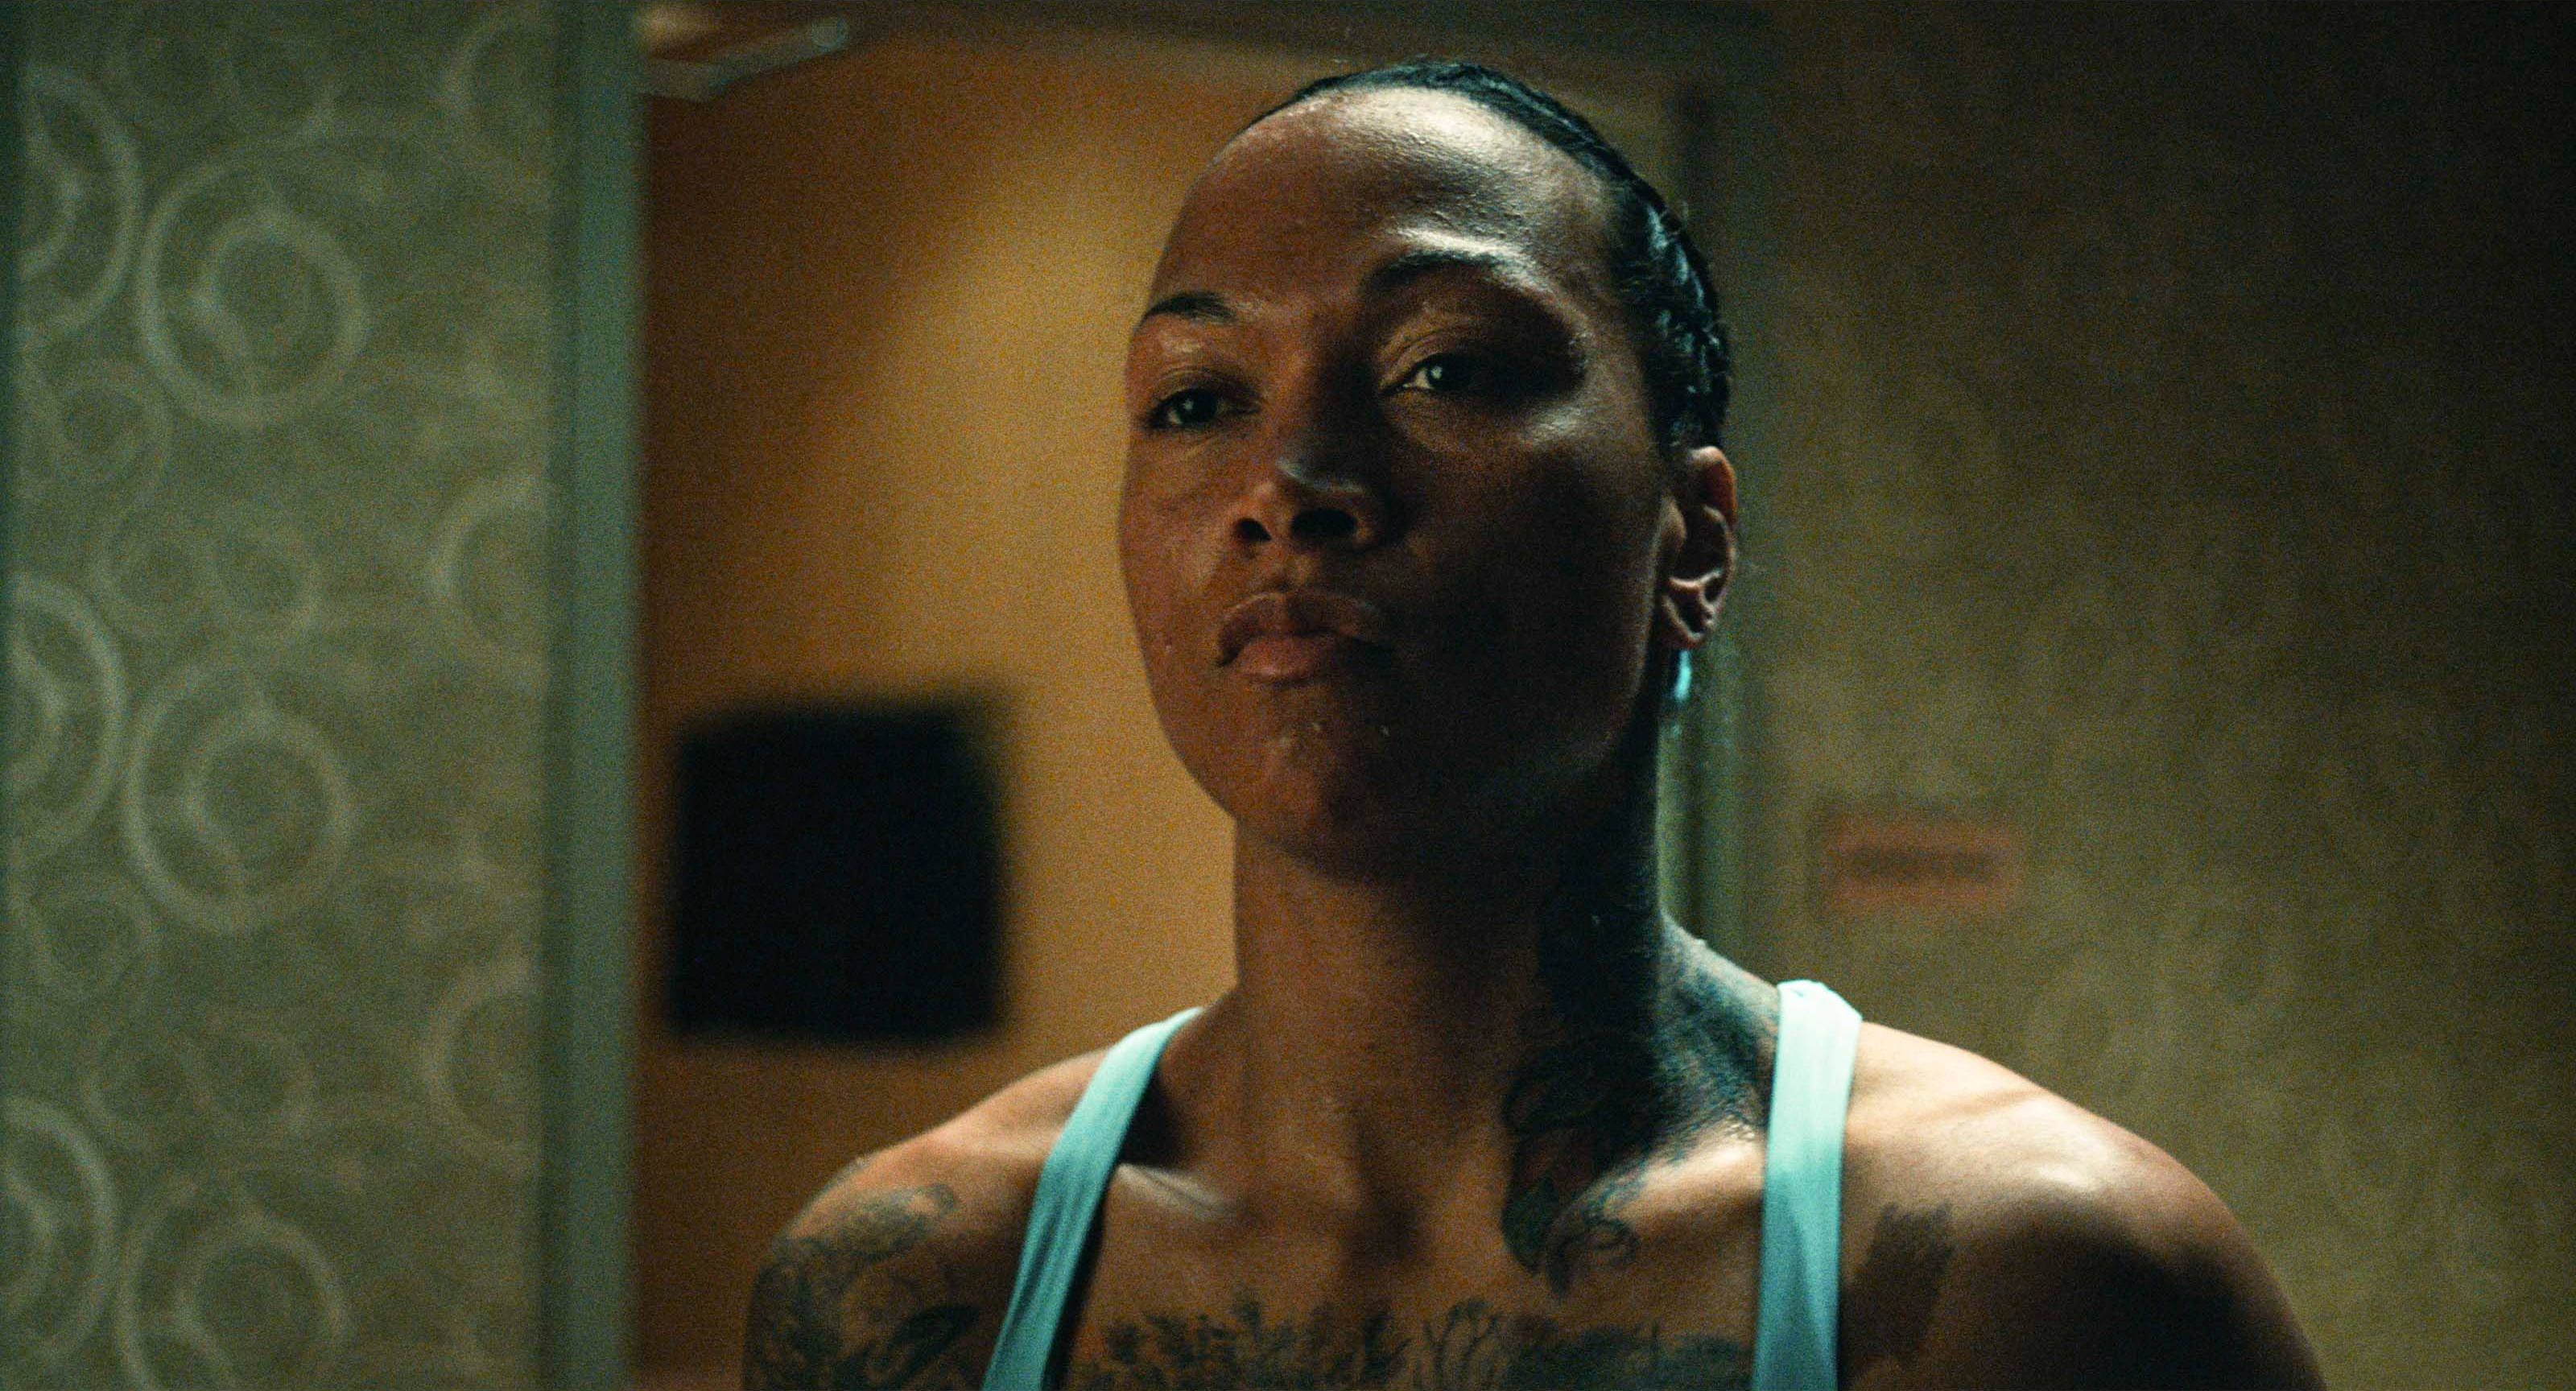 A Native boxer fights for her sister’s life in the gritty Catch The Fair One